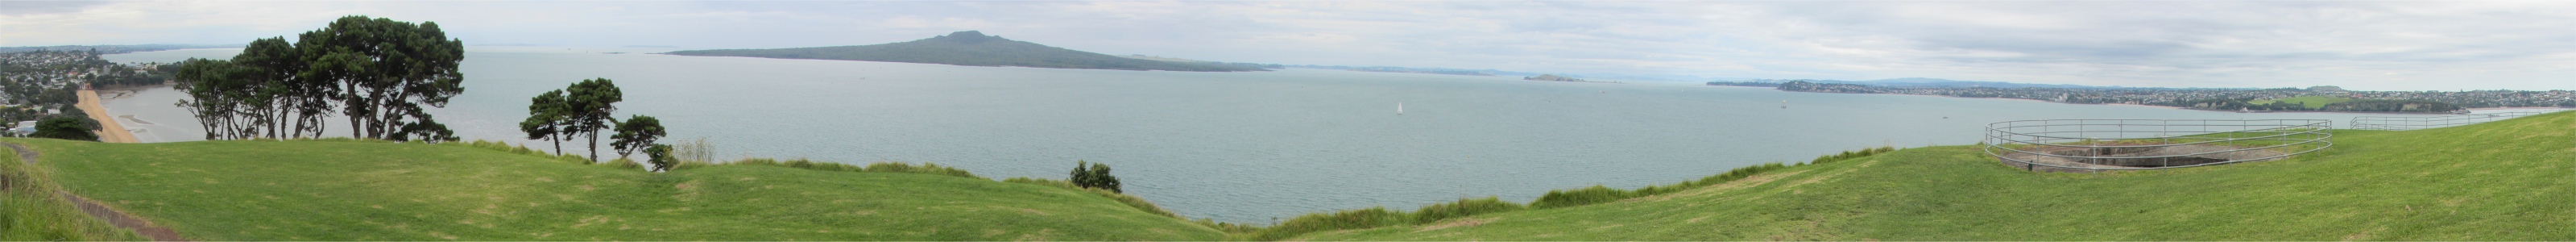 looking_to_rangitoto_from_north_head